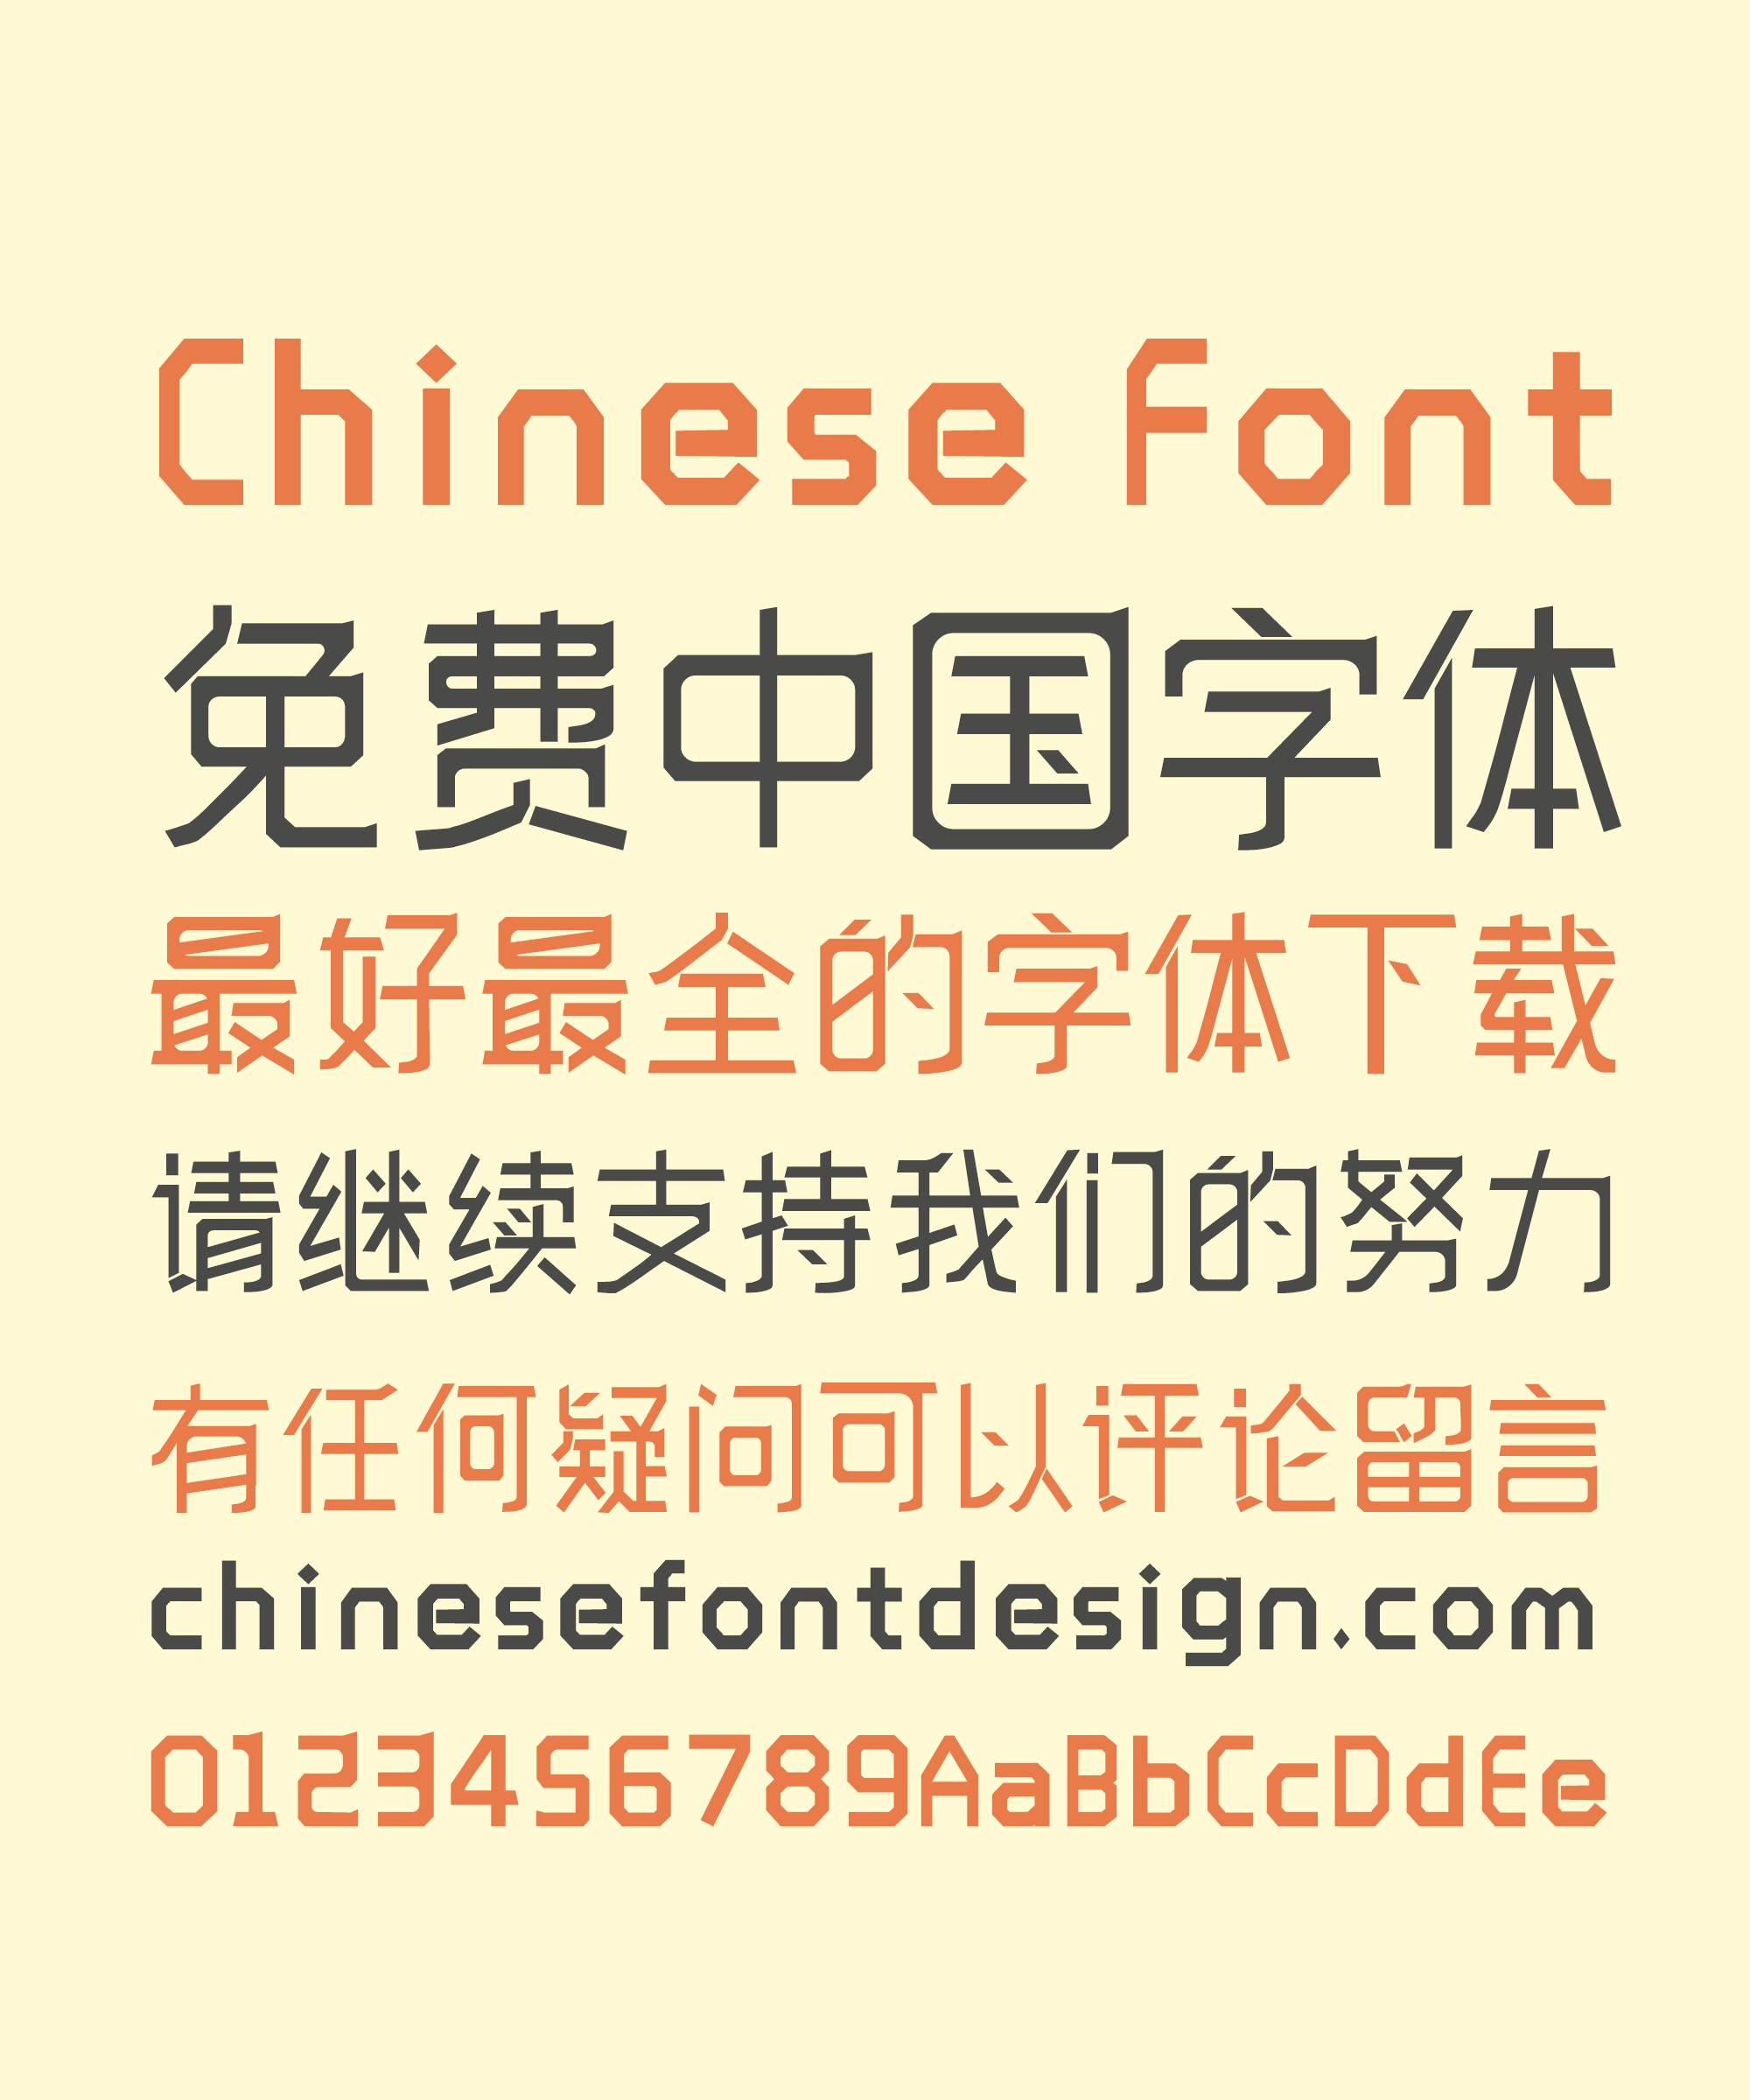 Chinese Font Download